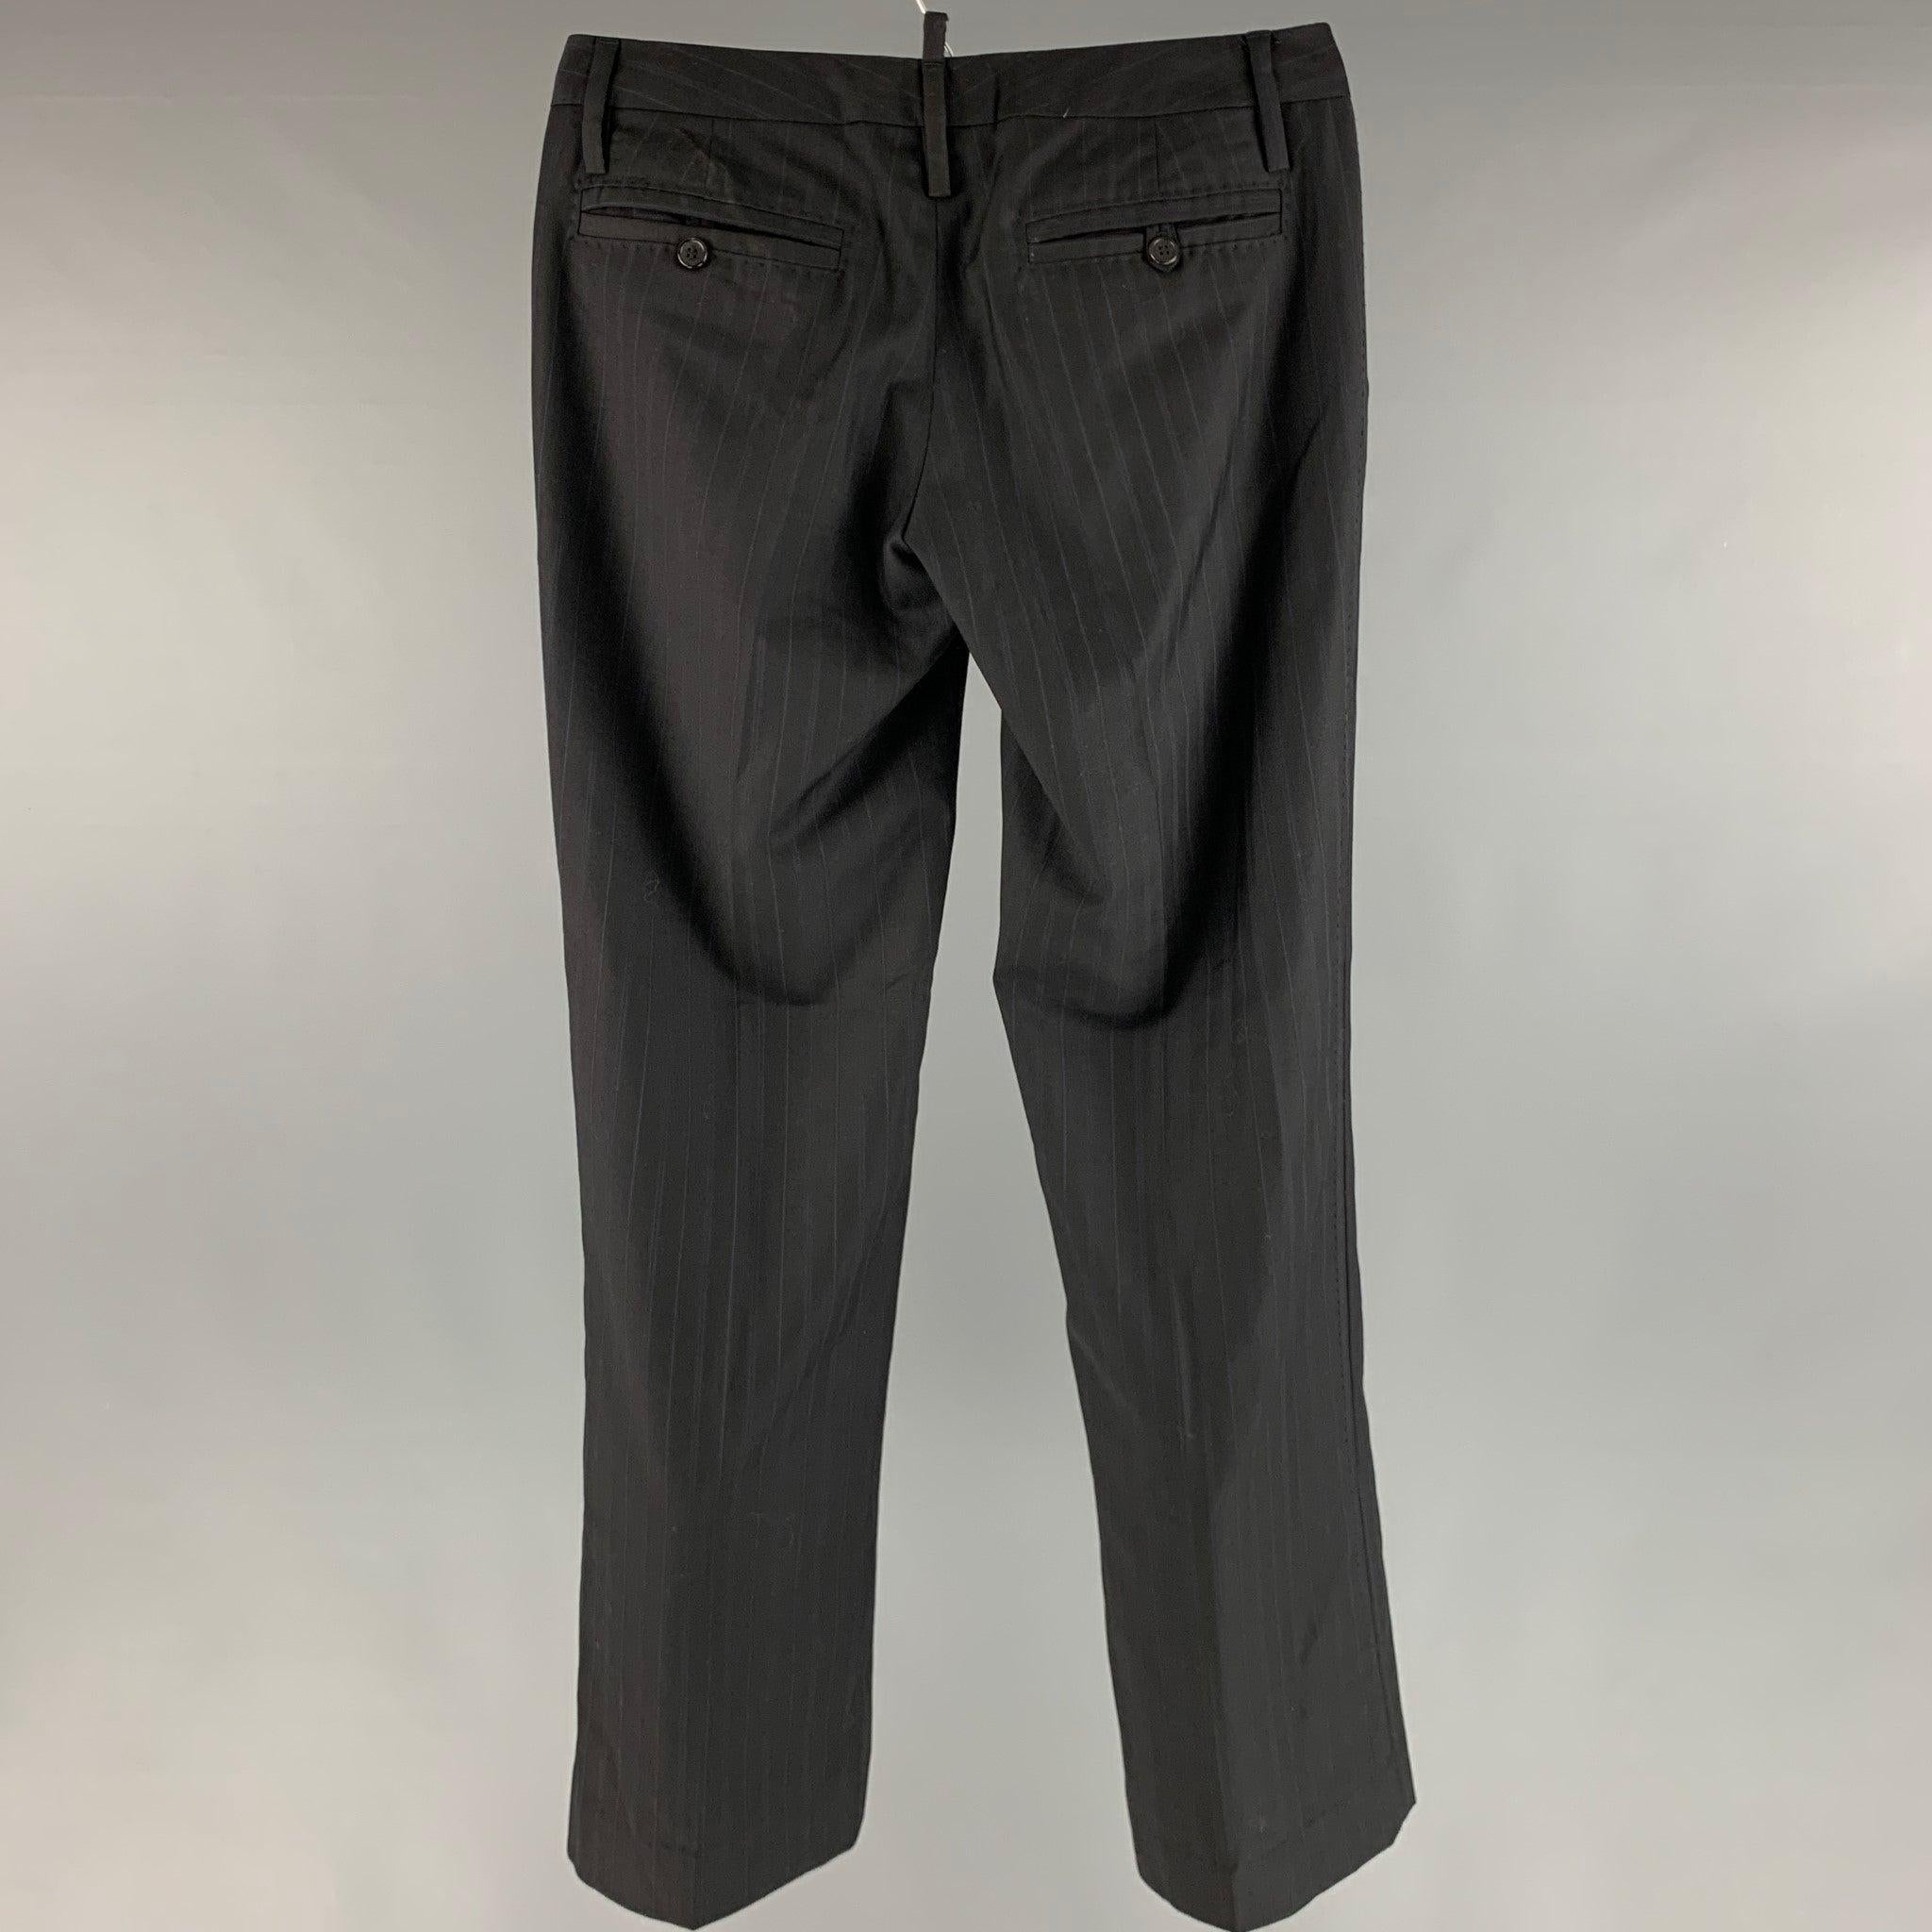 DSQUARED2 dress pants comes in black and navy wool stripped woven material featuring a low waist, and a zip up fly closure. Made in Italy.Very Good Pre-Owned Condition. 

Marked:  6 

Measurements: 
 Waist: 32 inches Rise: 5.5 inches Inseam: 31